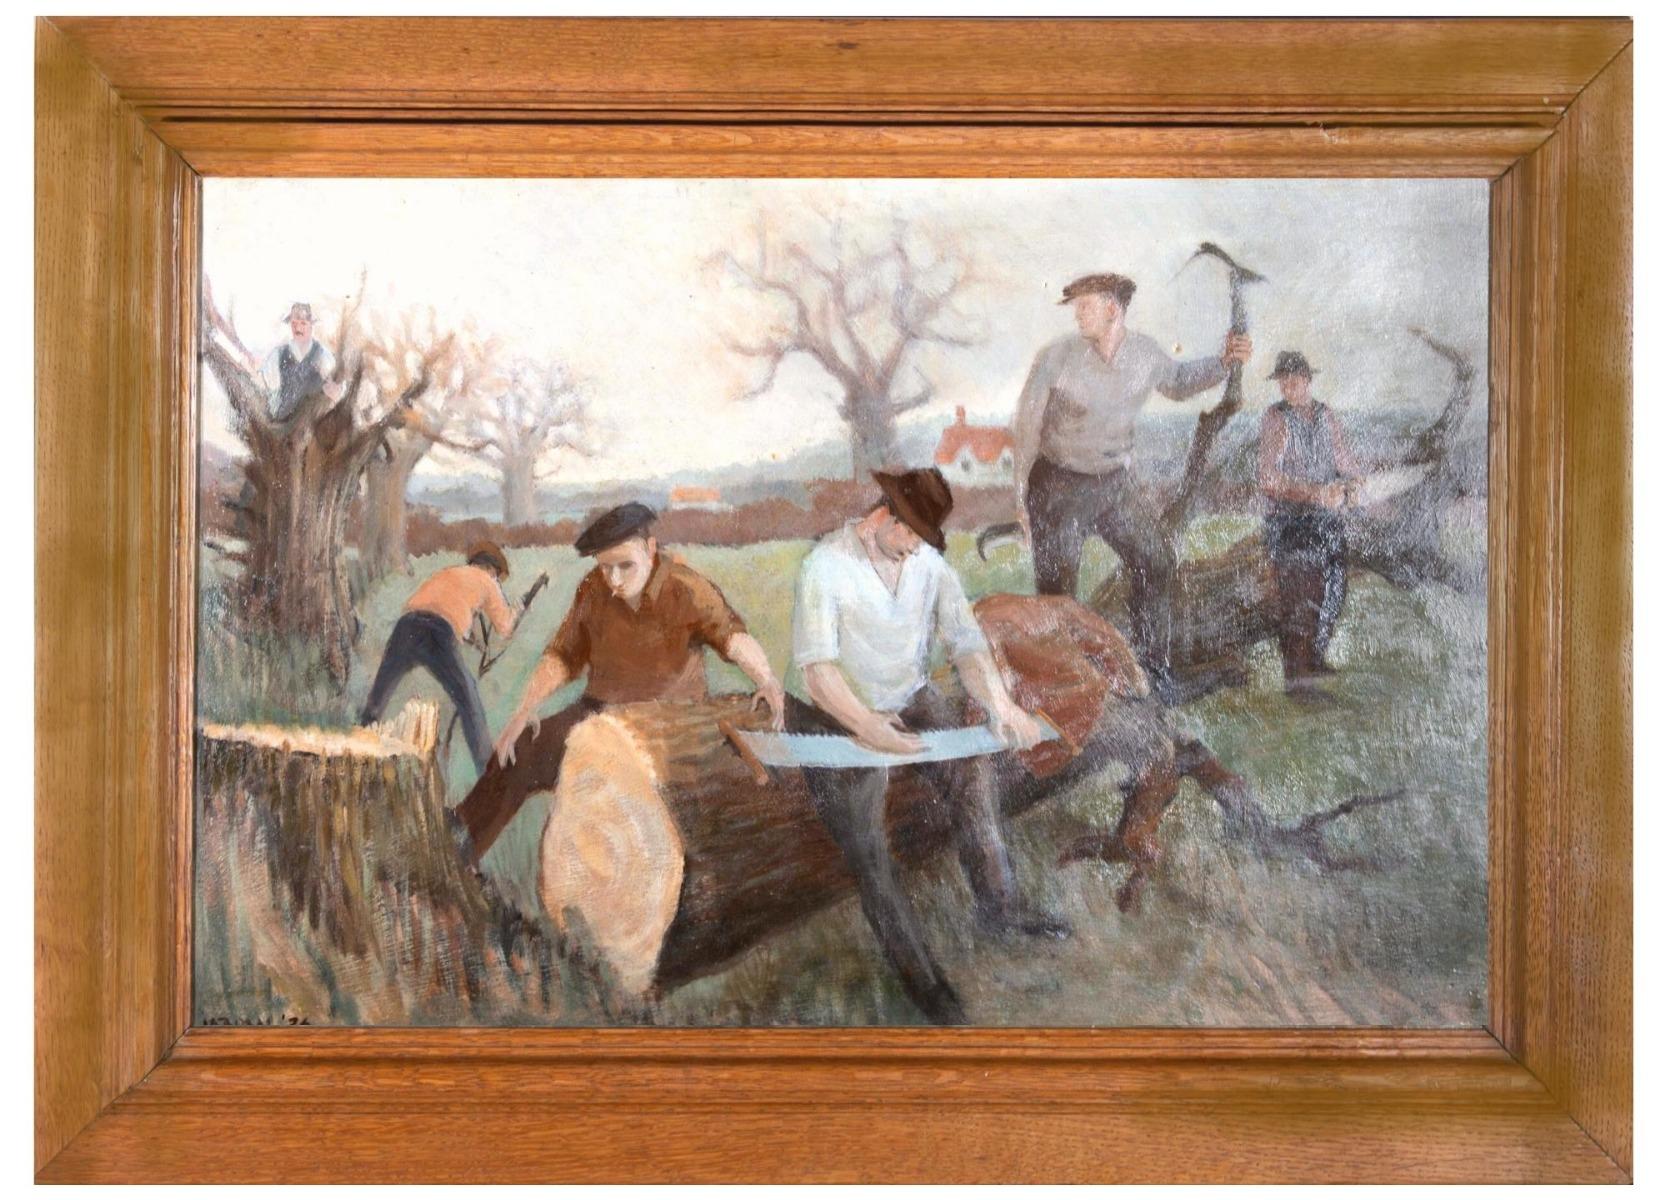 A truly striking, early 20th Century arabal scene in oil showing a group of tree cutters hard at work felling and dissecting an old tree. The scene is captured in muted tones with many angular lines and points of interest, creating an honest and